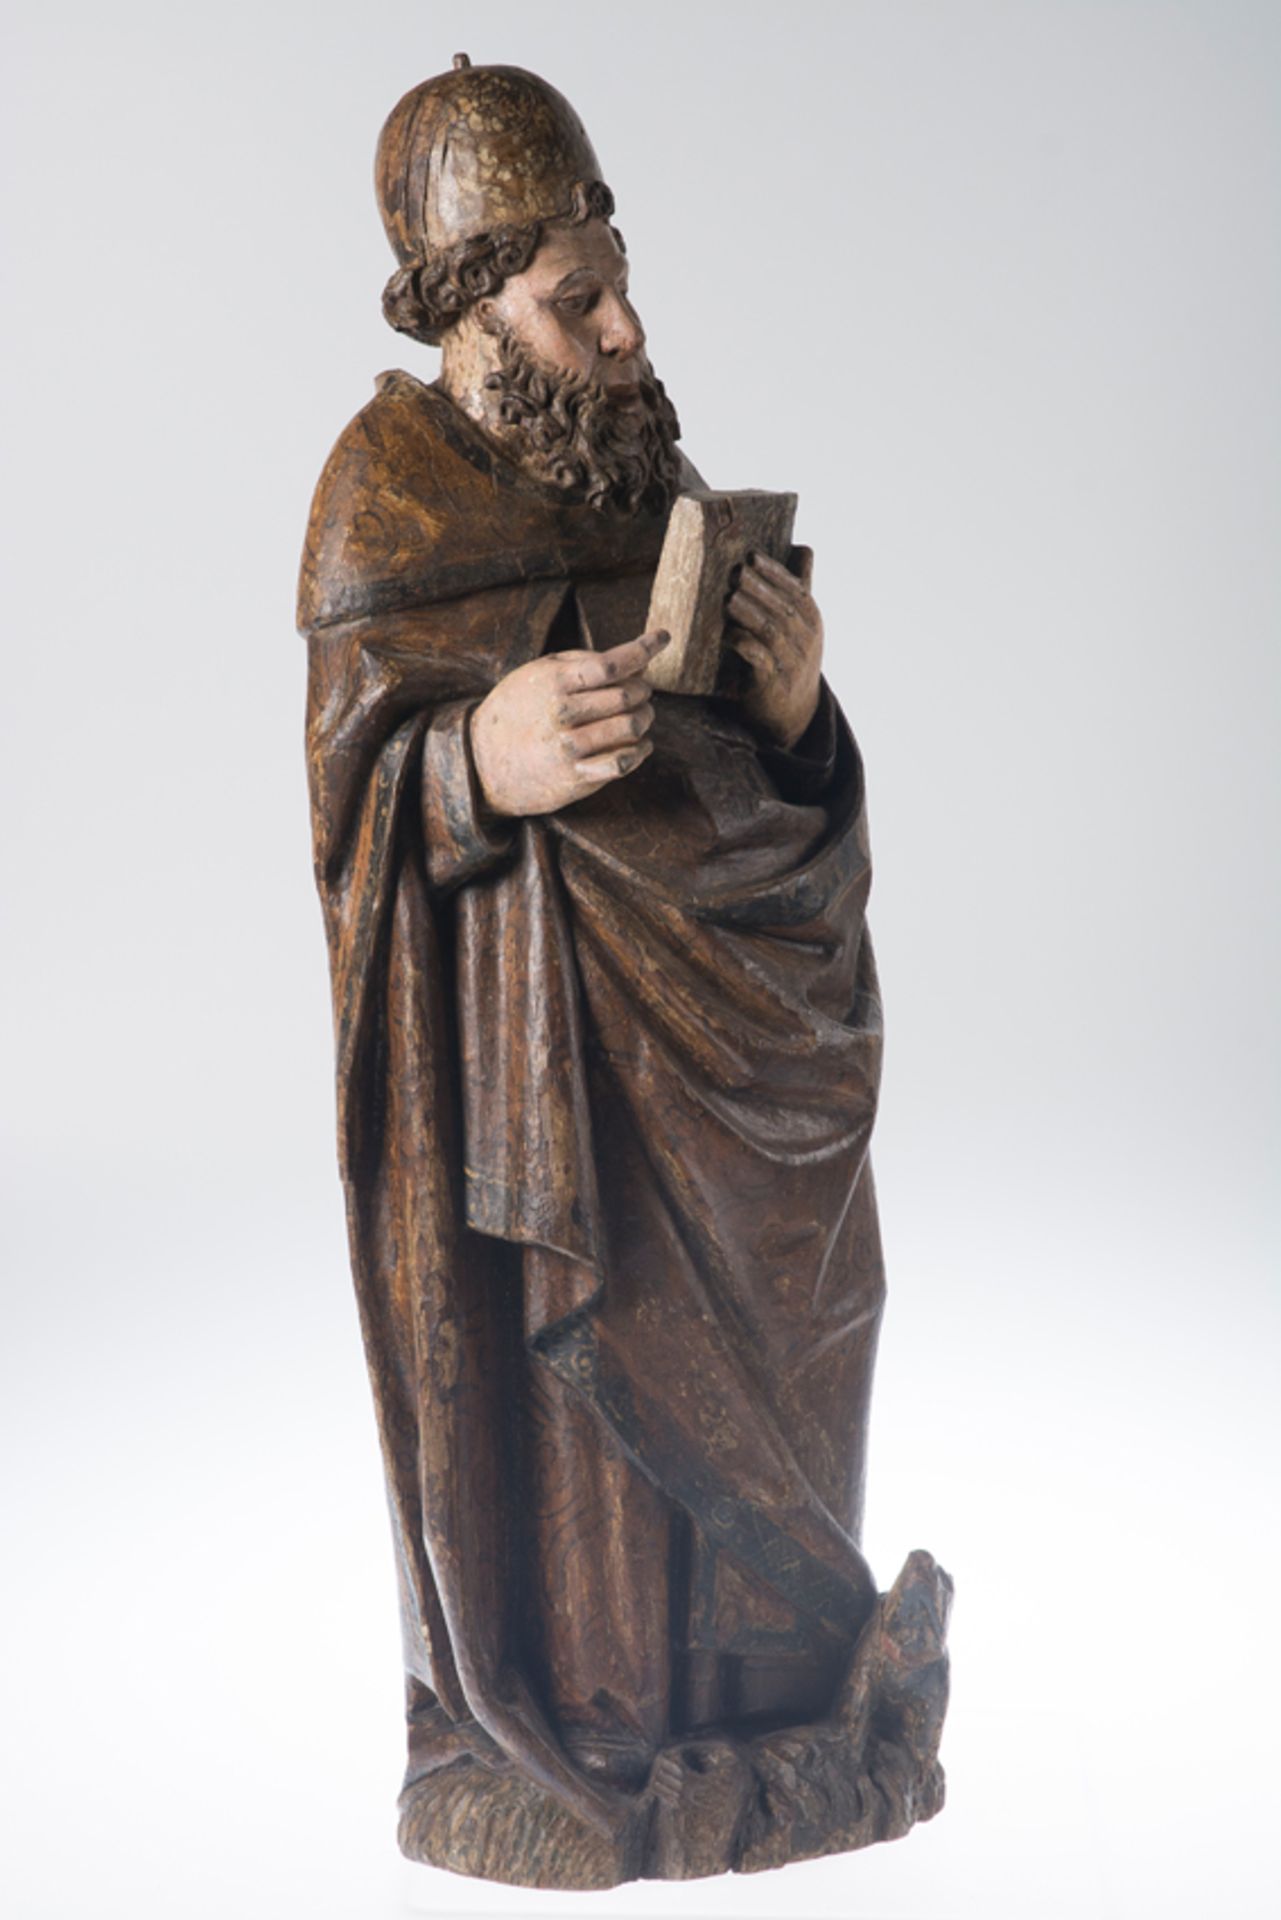 "Saint Anthony". Carved wooden sculpture. Castilian School. 15th century. - Image 2 of 10